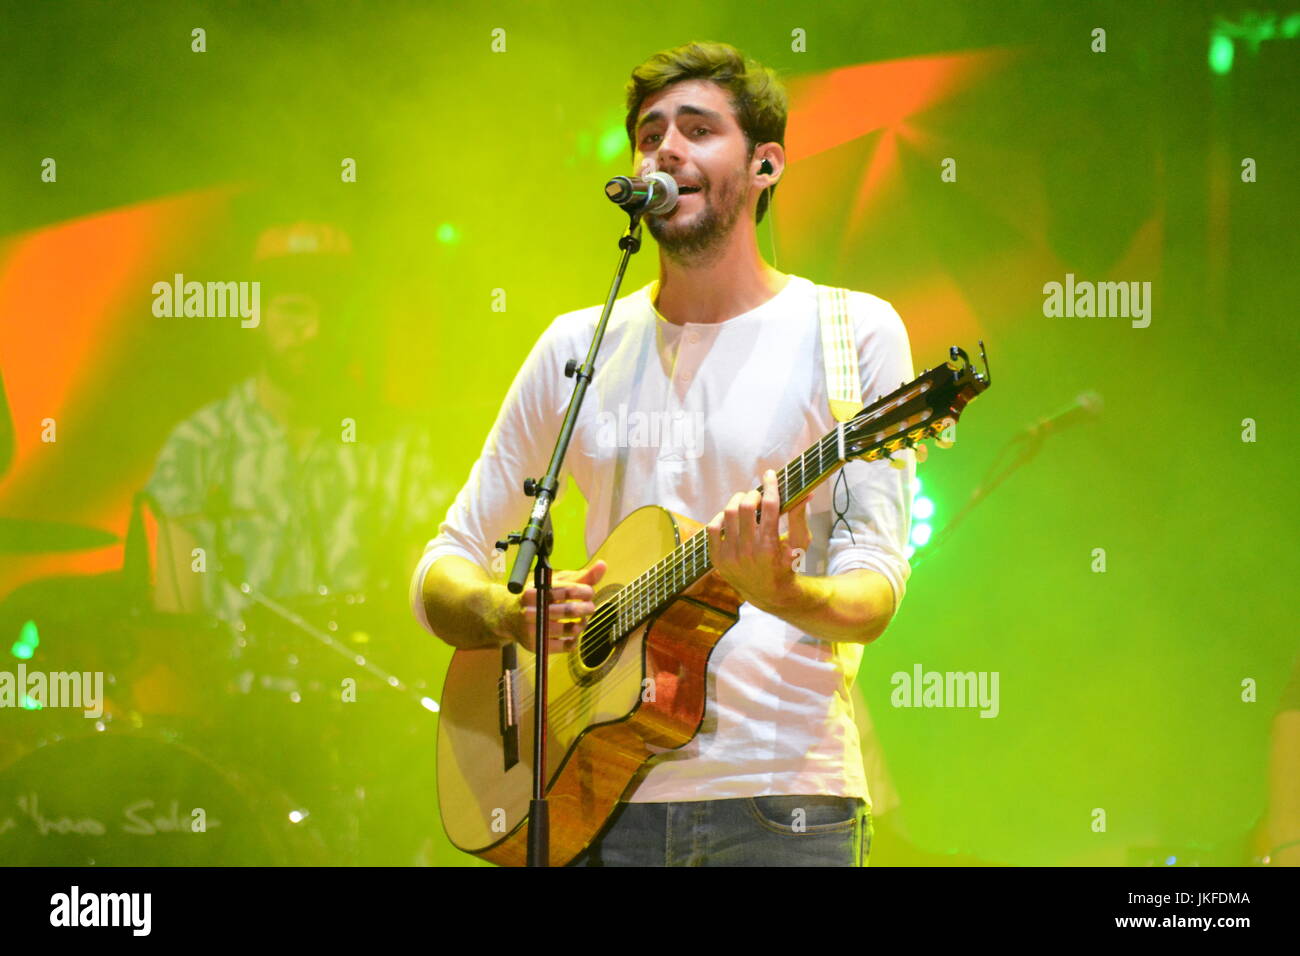 Naples, Italy. 22nd July, 2017. Álvaro Soler spanish singer and songwriter performs on the stage of the ETES Arena Flegrea in Naples during "Naples Noisy Fest" Credit: Mariano Montella/Alamy Live News Stock Photo